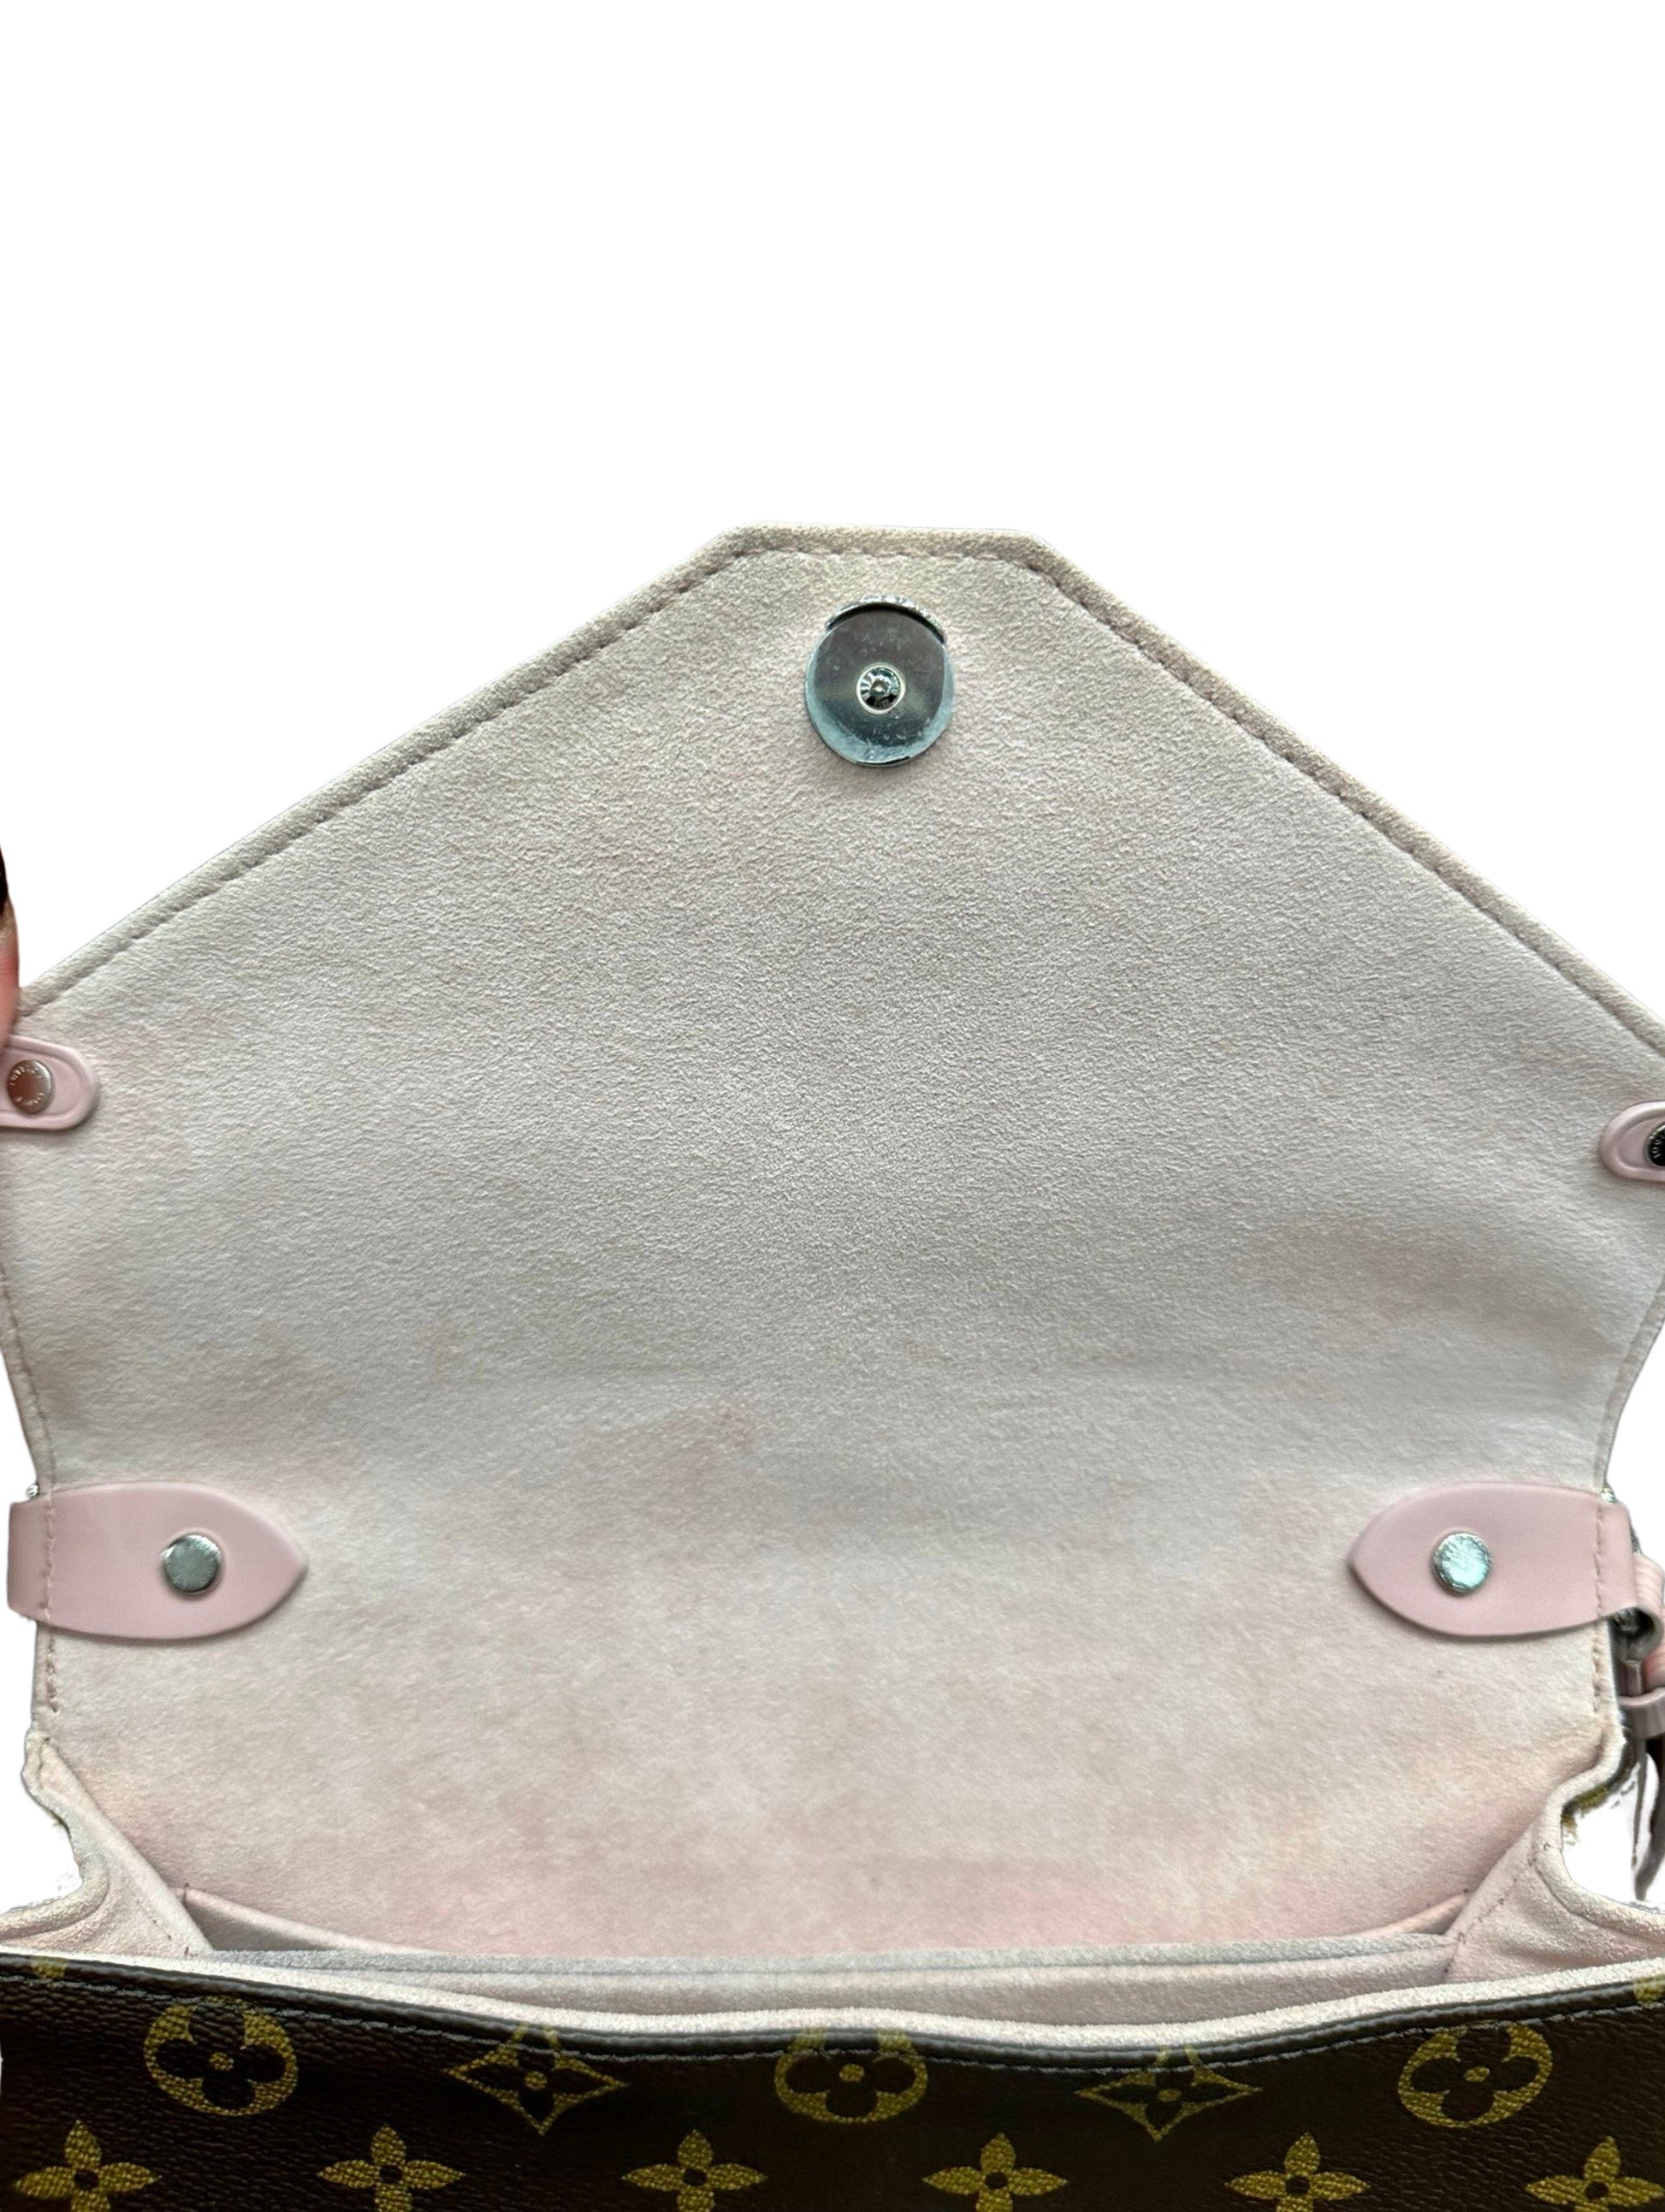 Close up of interior of flap with pink suede and silver hardware. Plastic still on silver hardware closure.